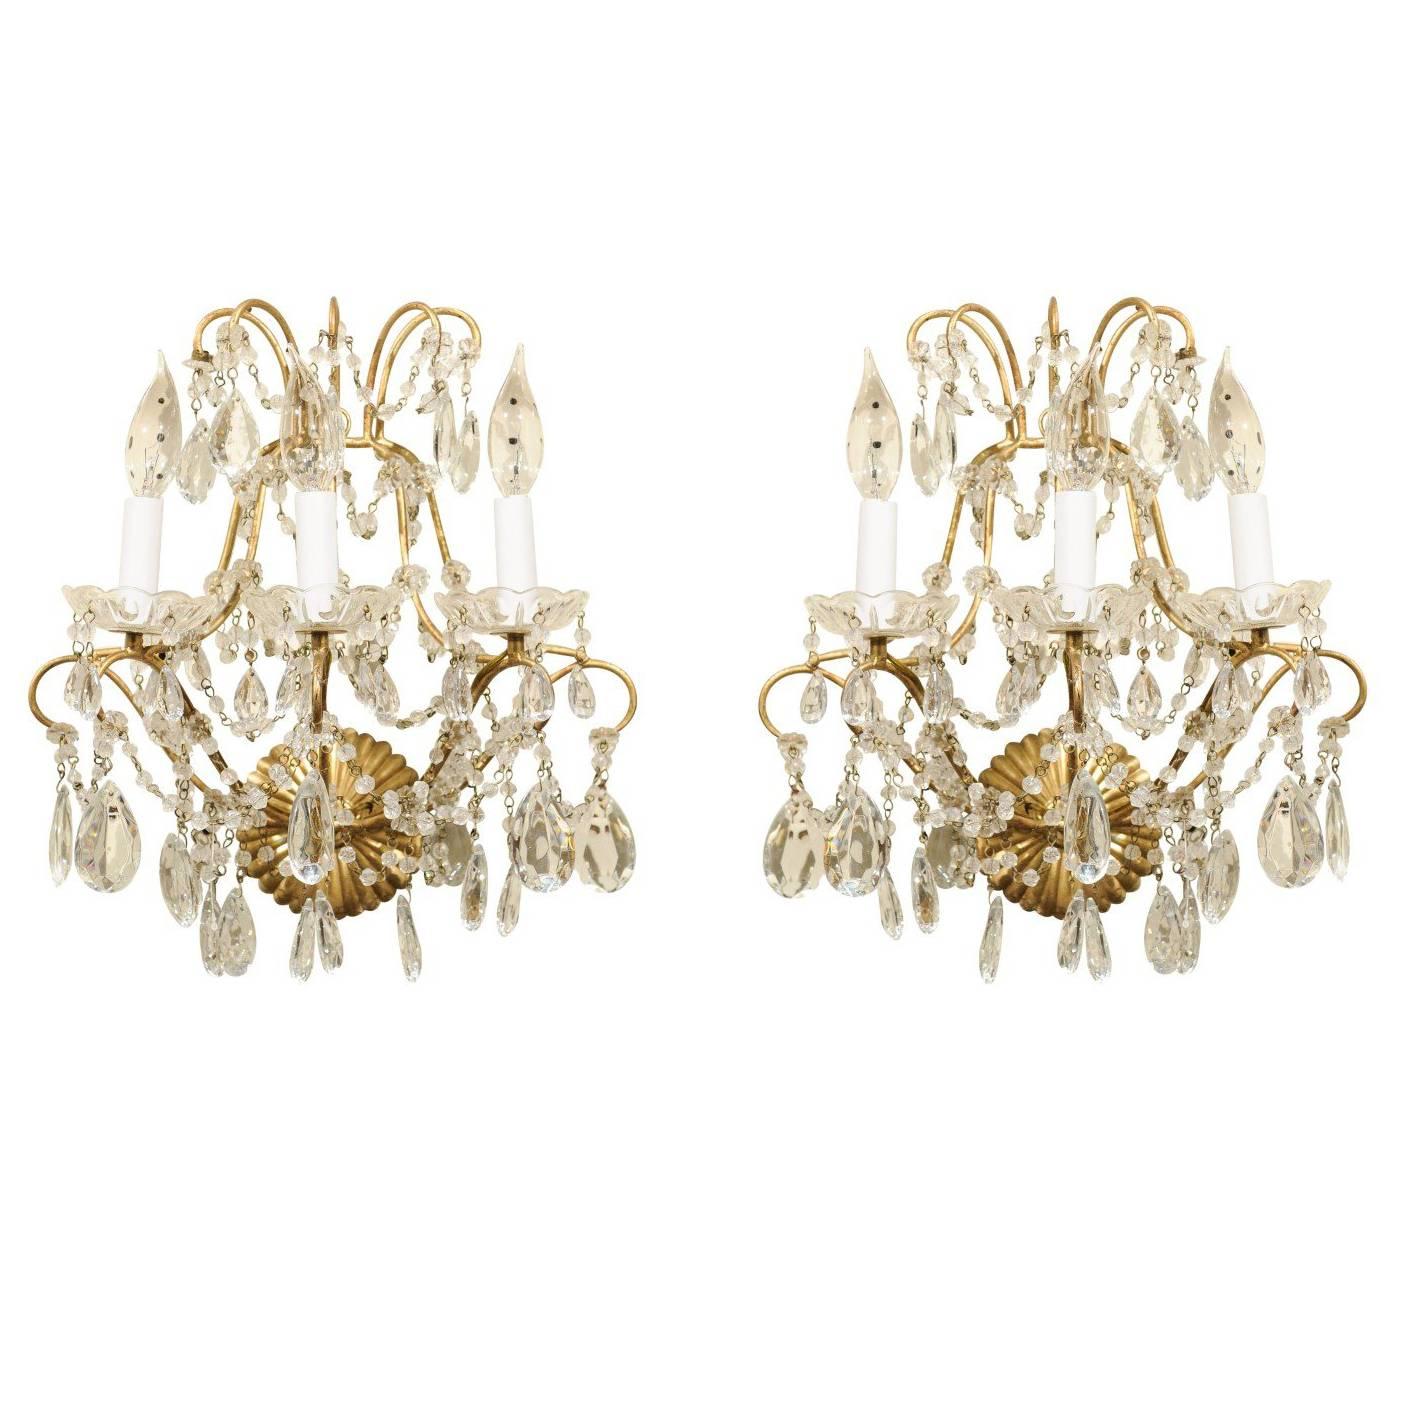 19th Century French Sconces